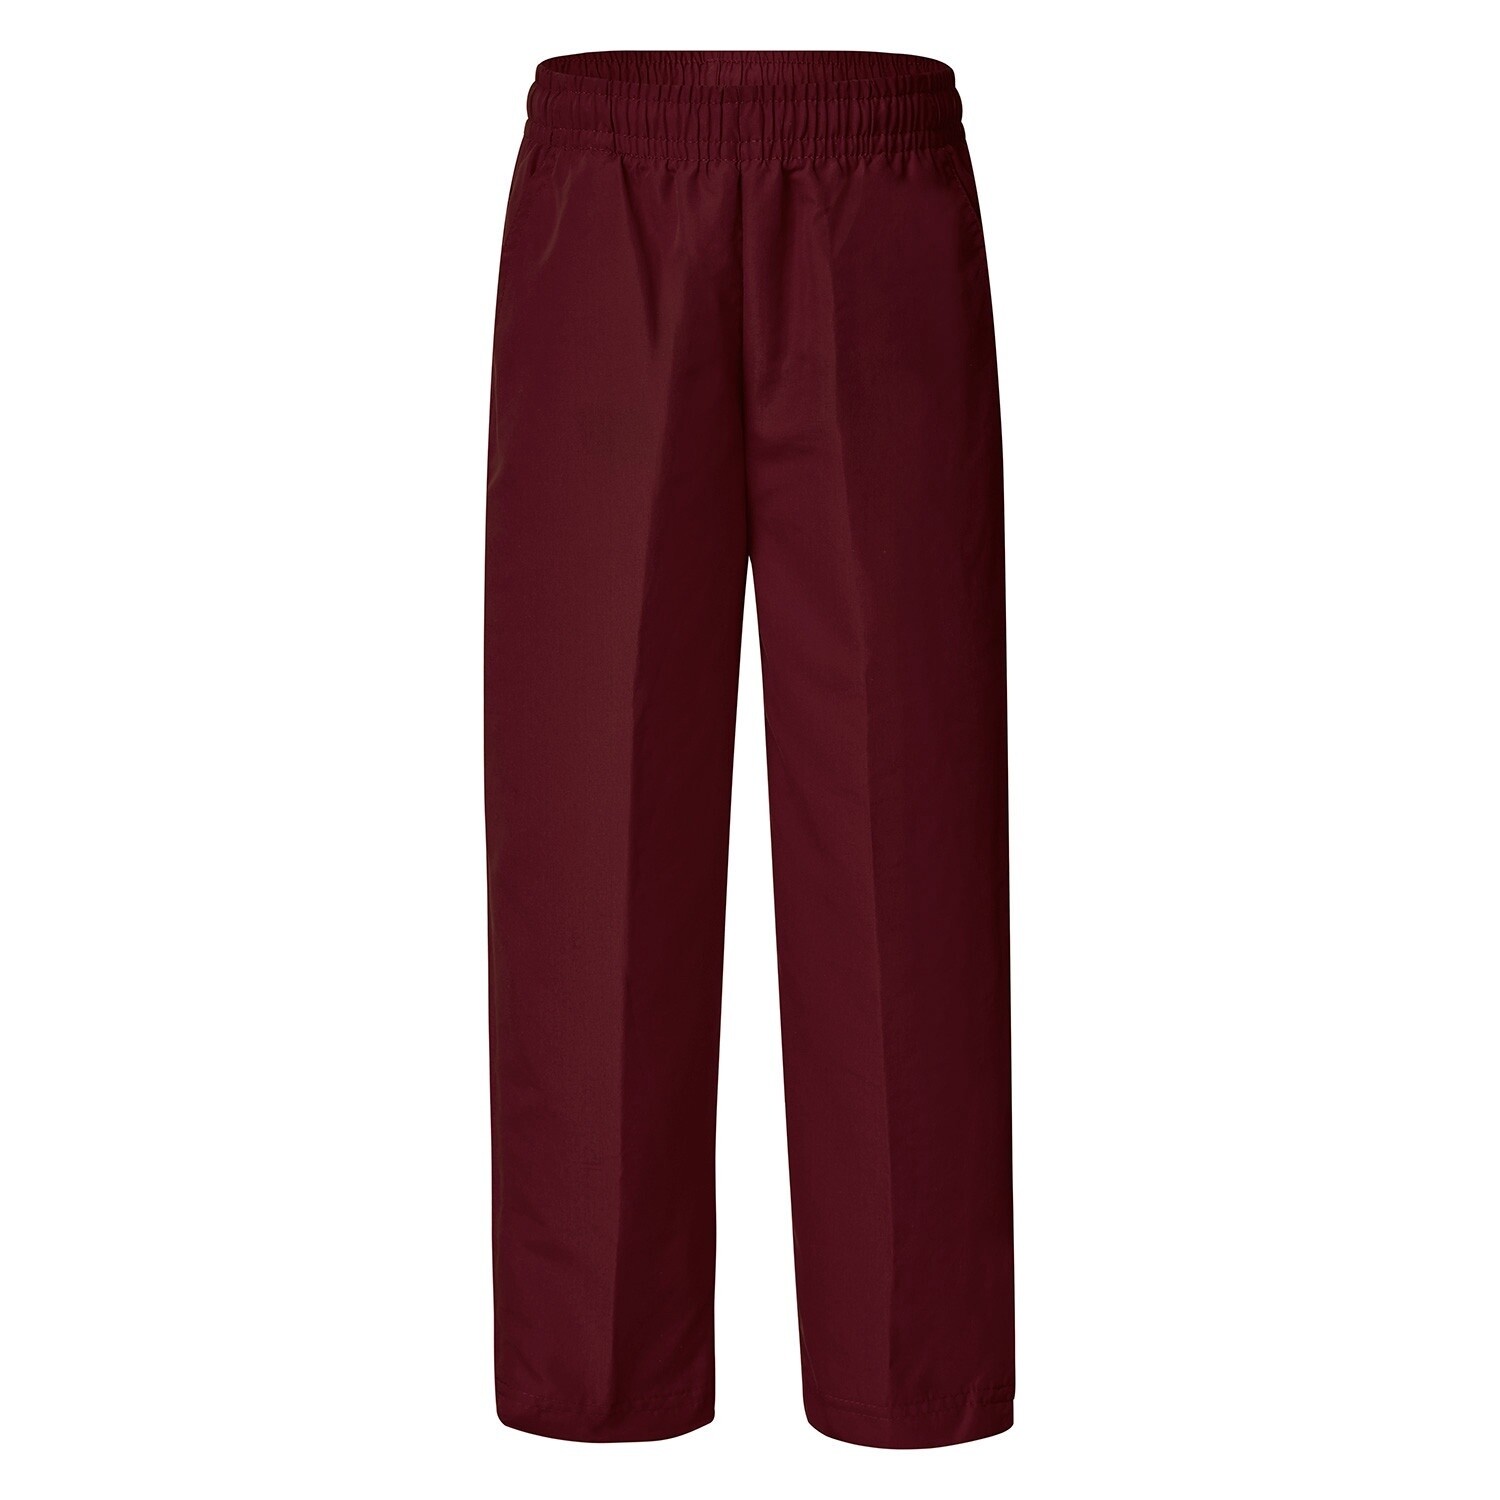 SS Peter and Paul- Maroon Sports Track Pants, Size: 4